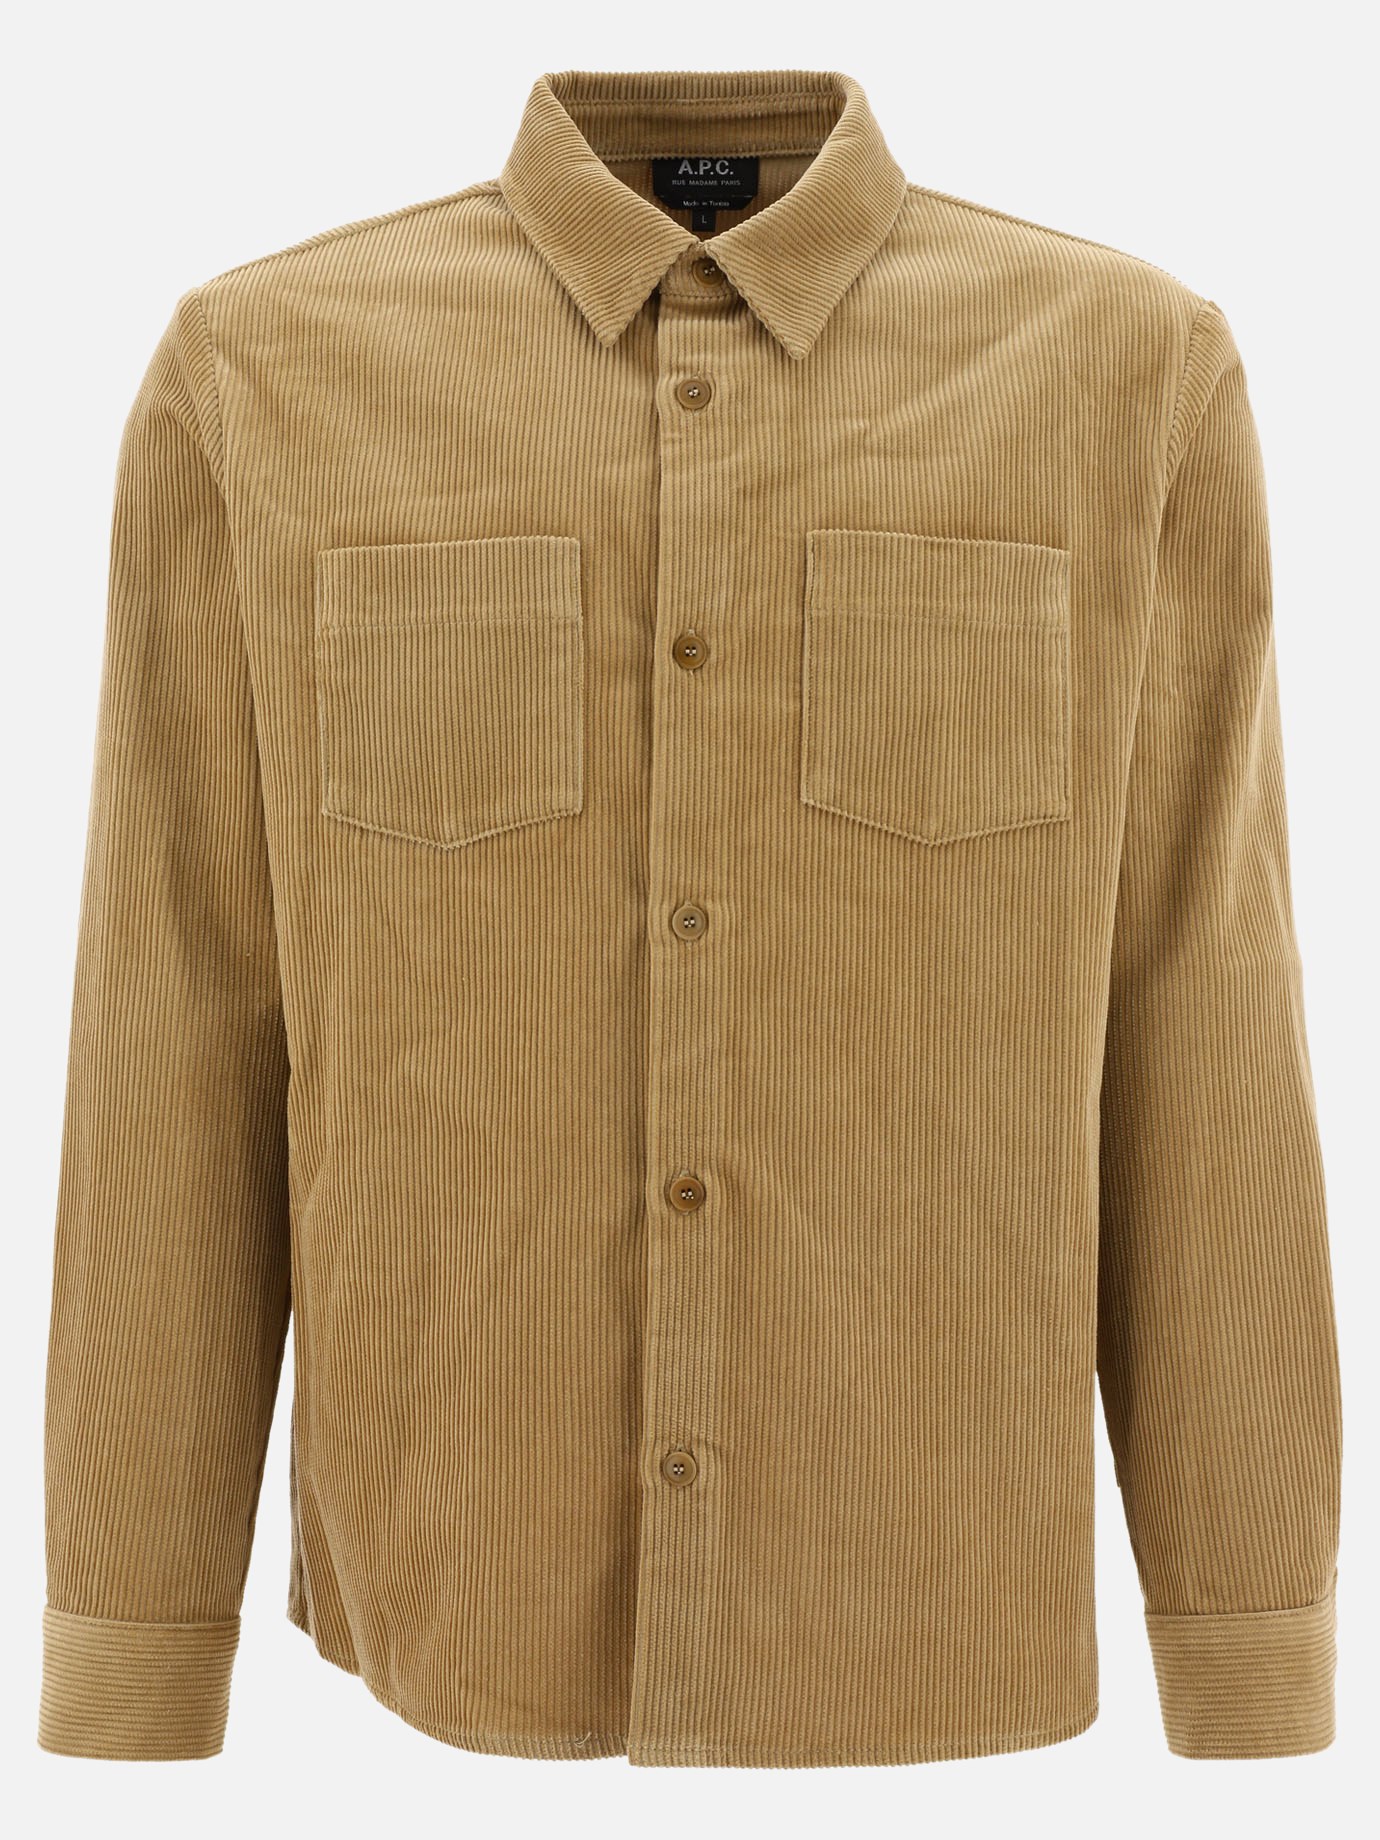 Overshirt in velluto a coste  Joe by A.P.C. - 5